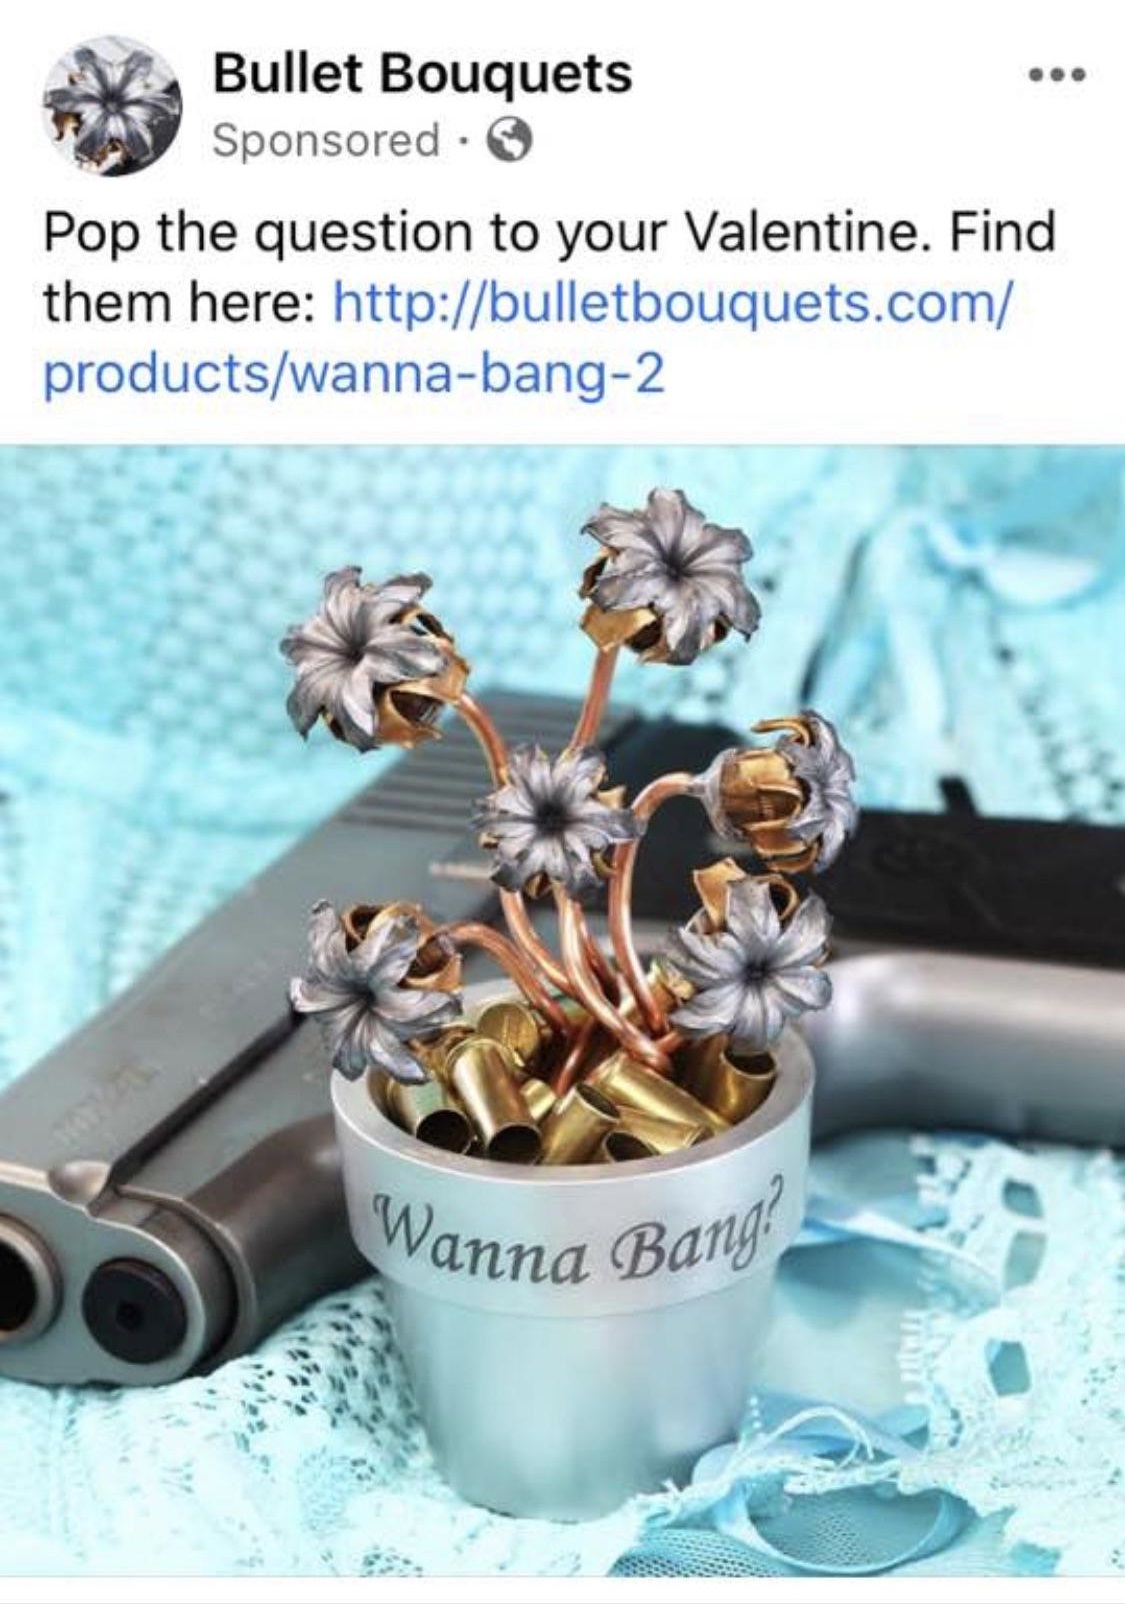 wanna bang bullet bouquet - Bullet Bouquets Sponsored Pop the question to your Valentine. Find them here productswannabang2 Wanna Bangi